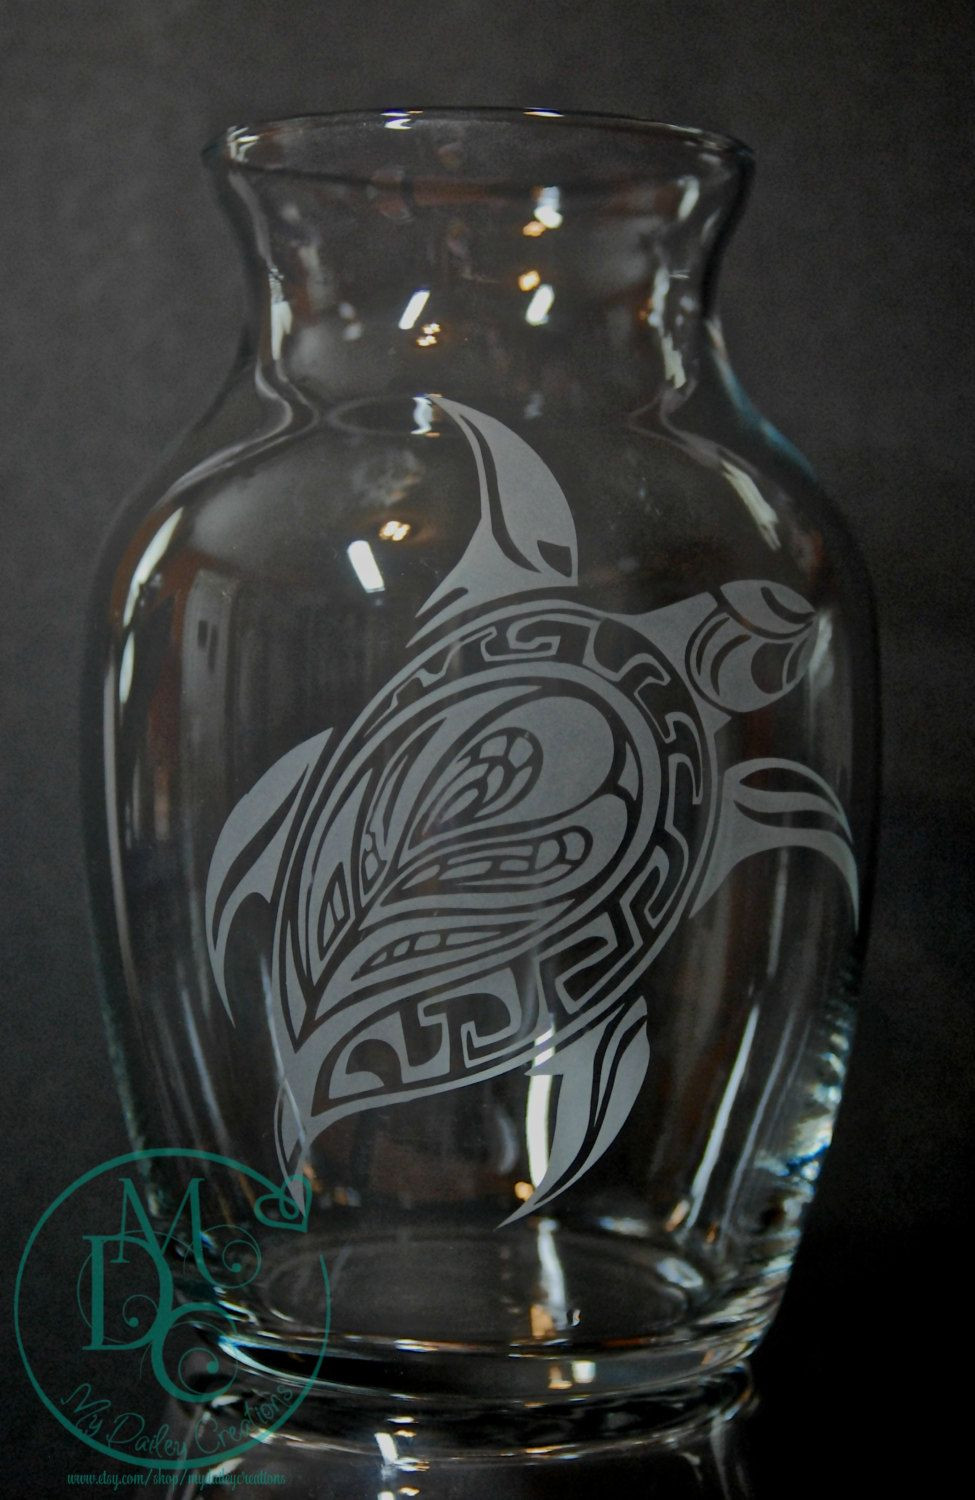 21 Amazing Beach Vase Ideas 2024 free download beach vase ideas of tribal sea turtle vase glass etched vase etched glass gifts inside glass etched sea turtle vase sandblasted sand carved glass art glass etching beach pinned by pin4etsy c